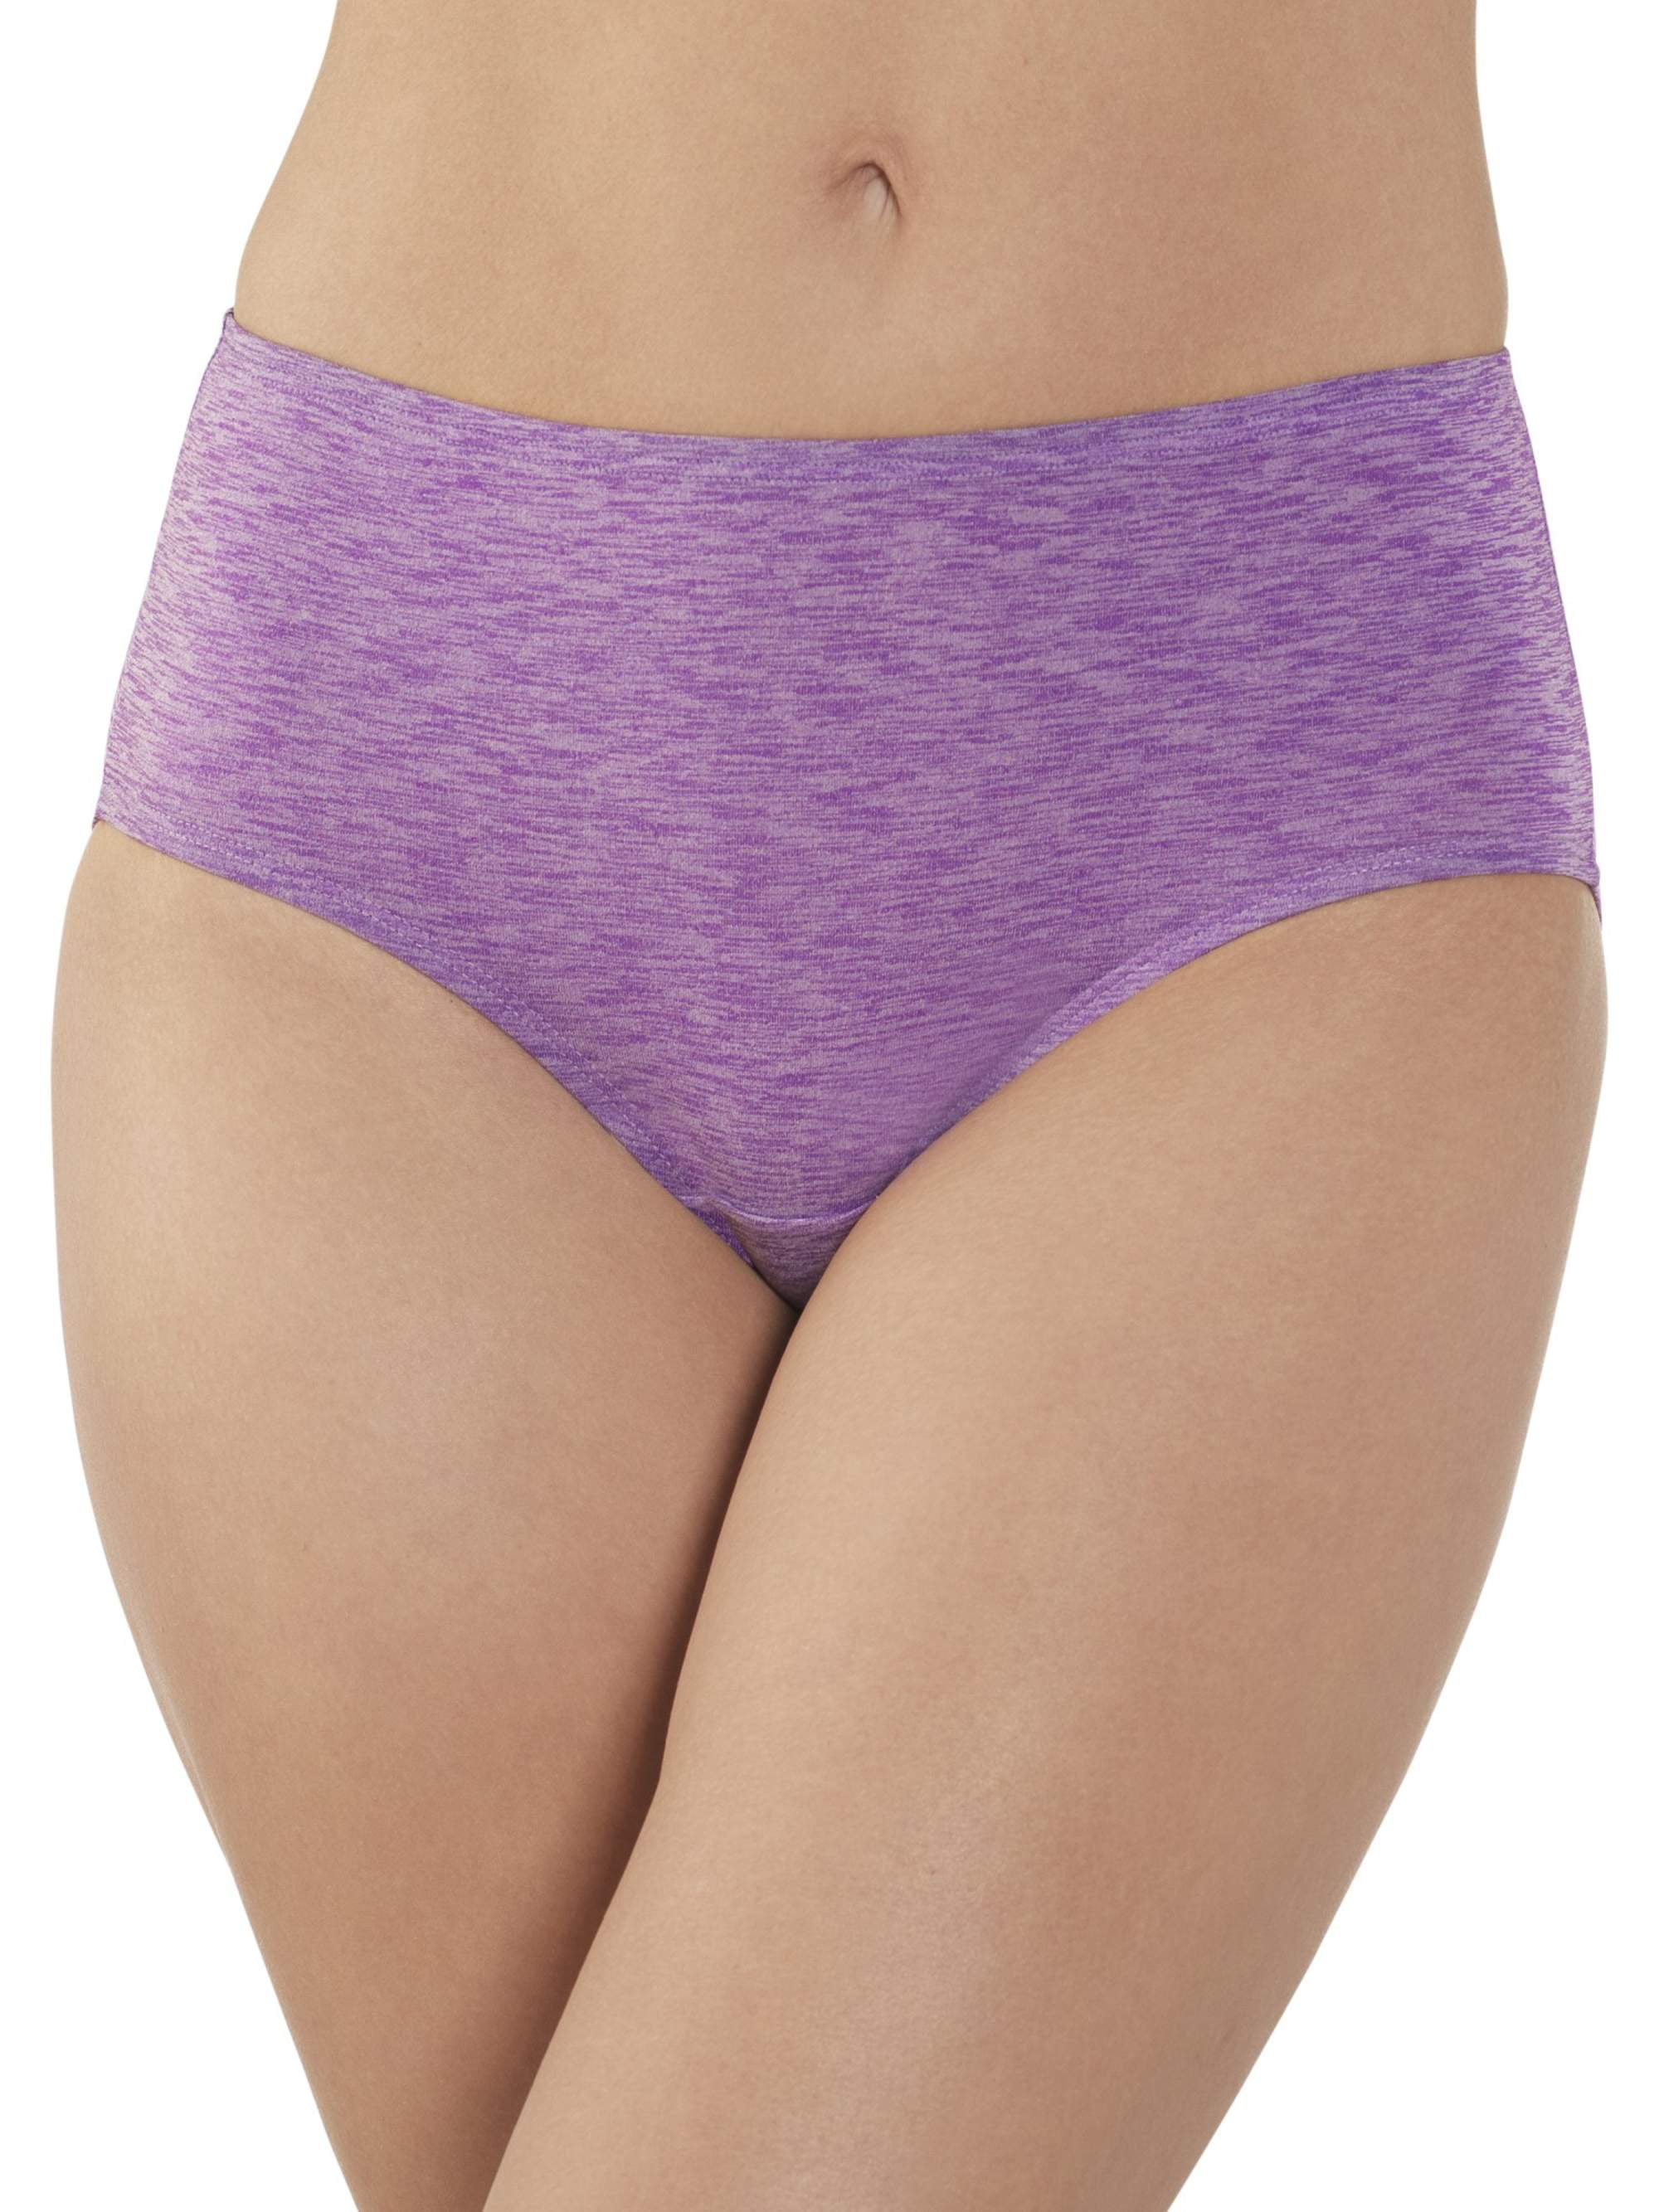 Fruit of the Loom 5 Breathable Micro Mesh Low Rise Briefs Womens SM Colors VARY